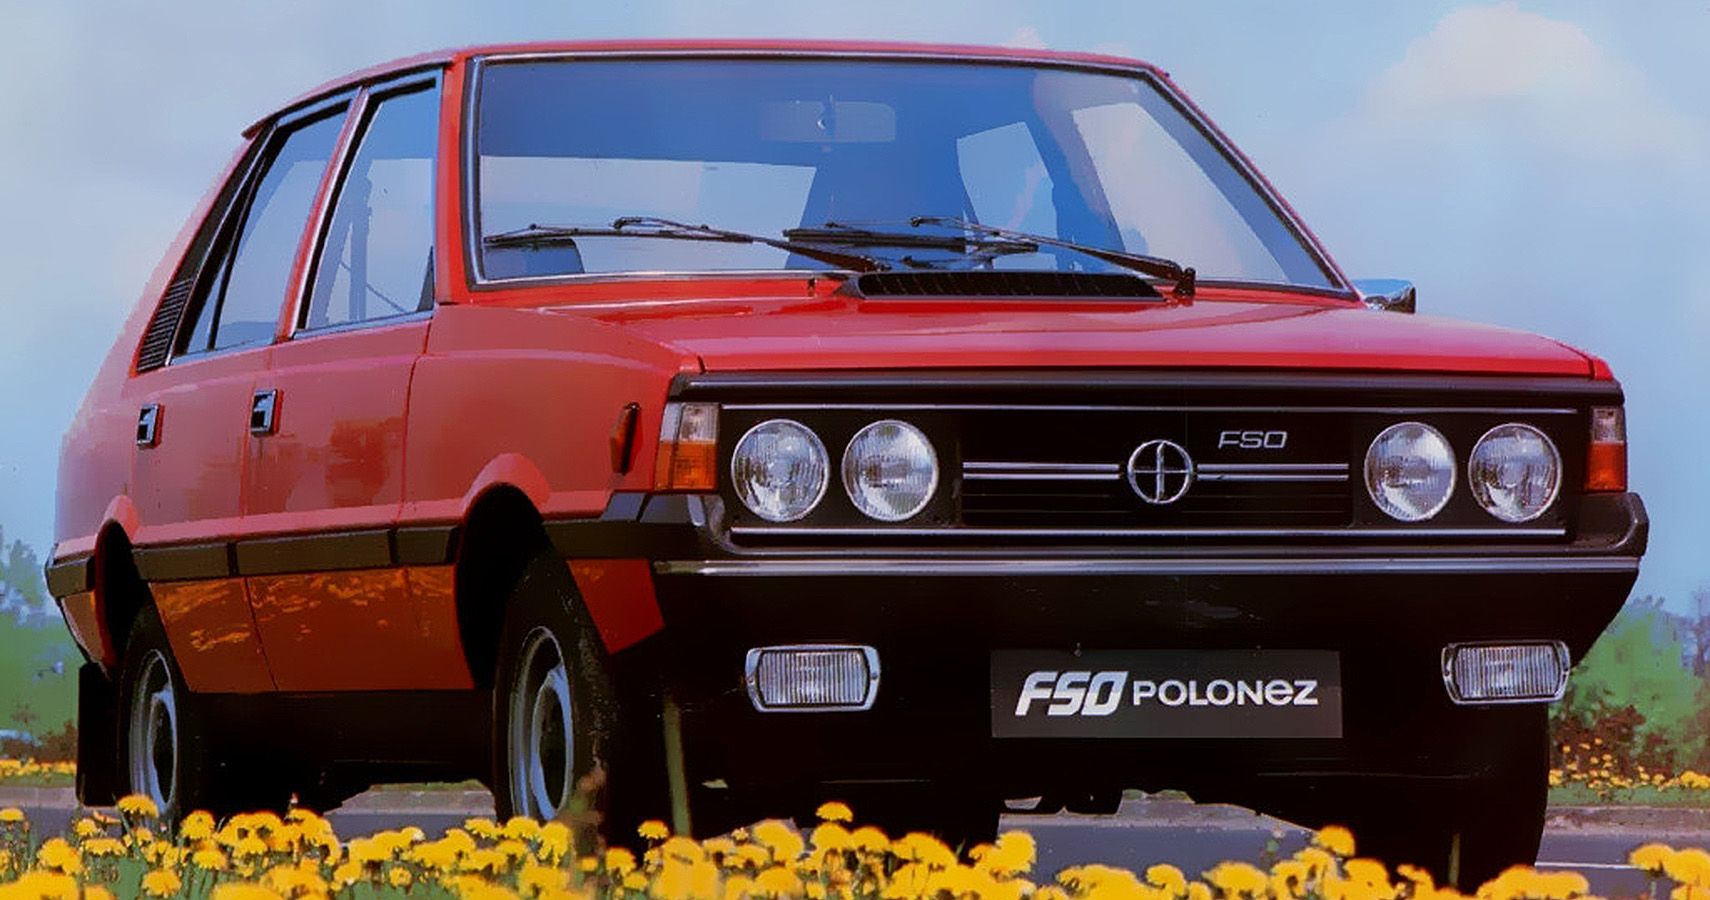 1978-2002 FSO Polonez: Yet Another Wedge?